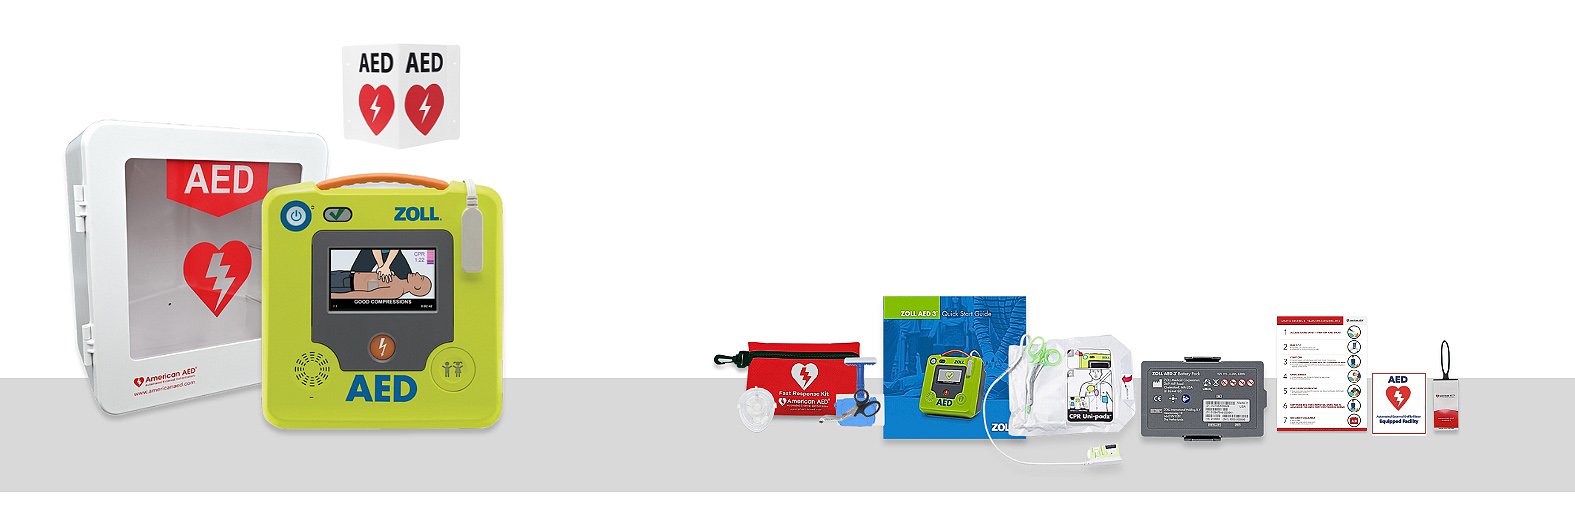 ZOLL AED 3 Complete Defibrillator Package With Cabinet & Sign